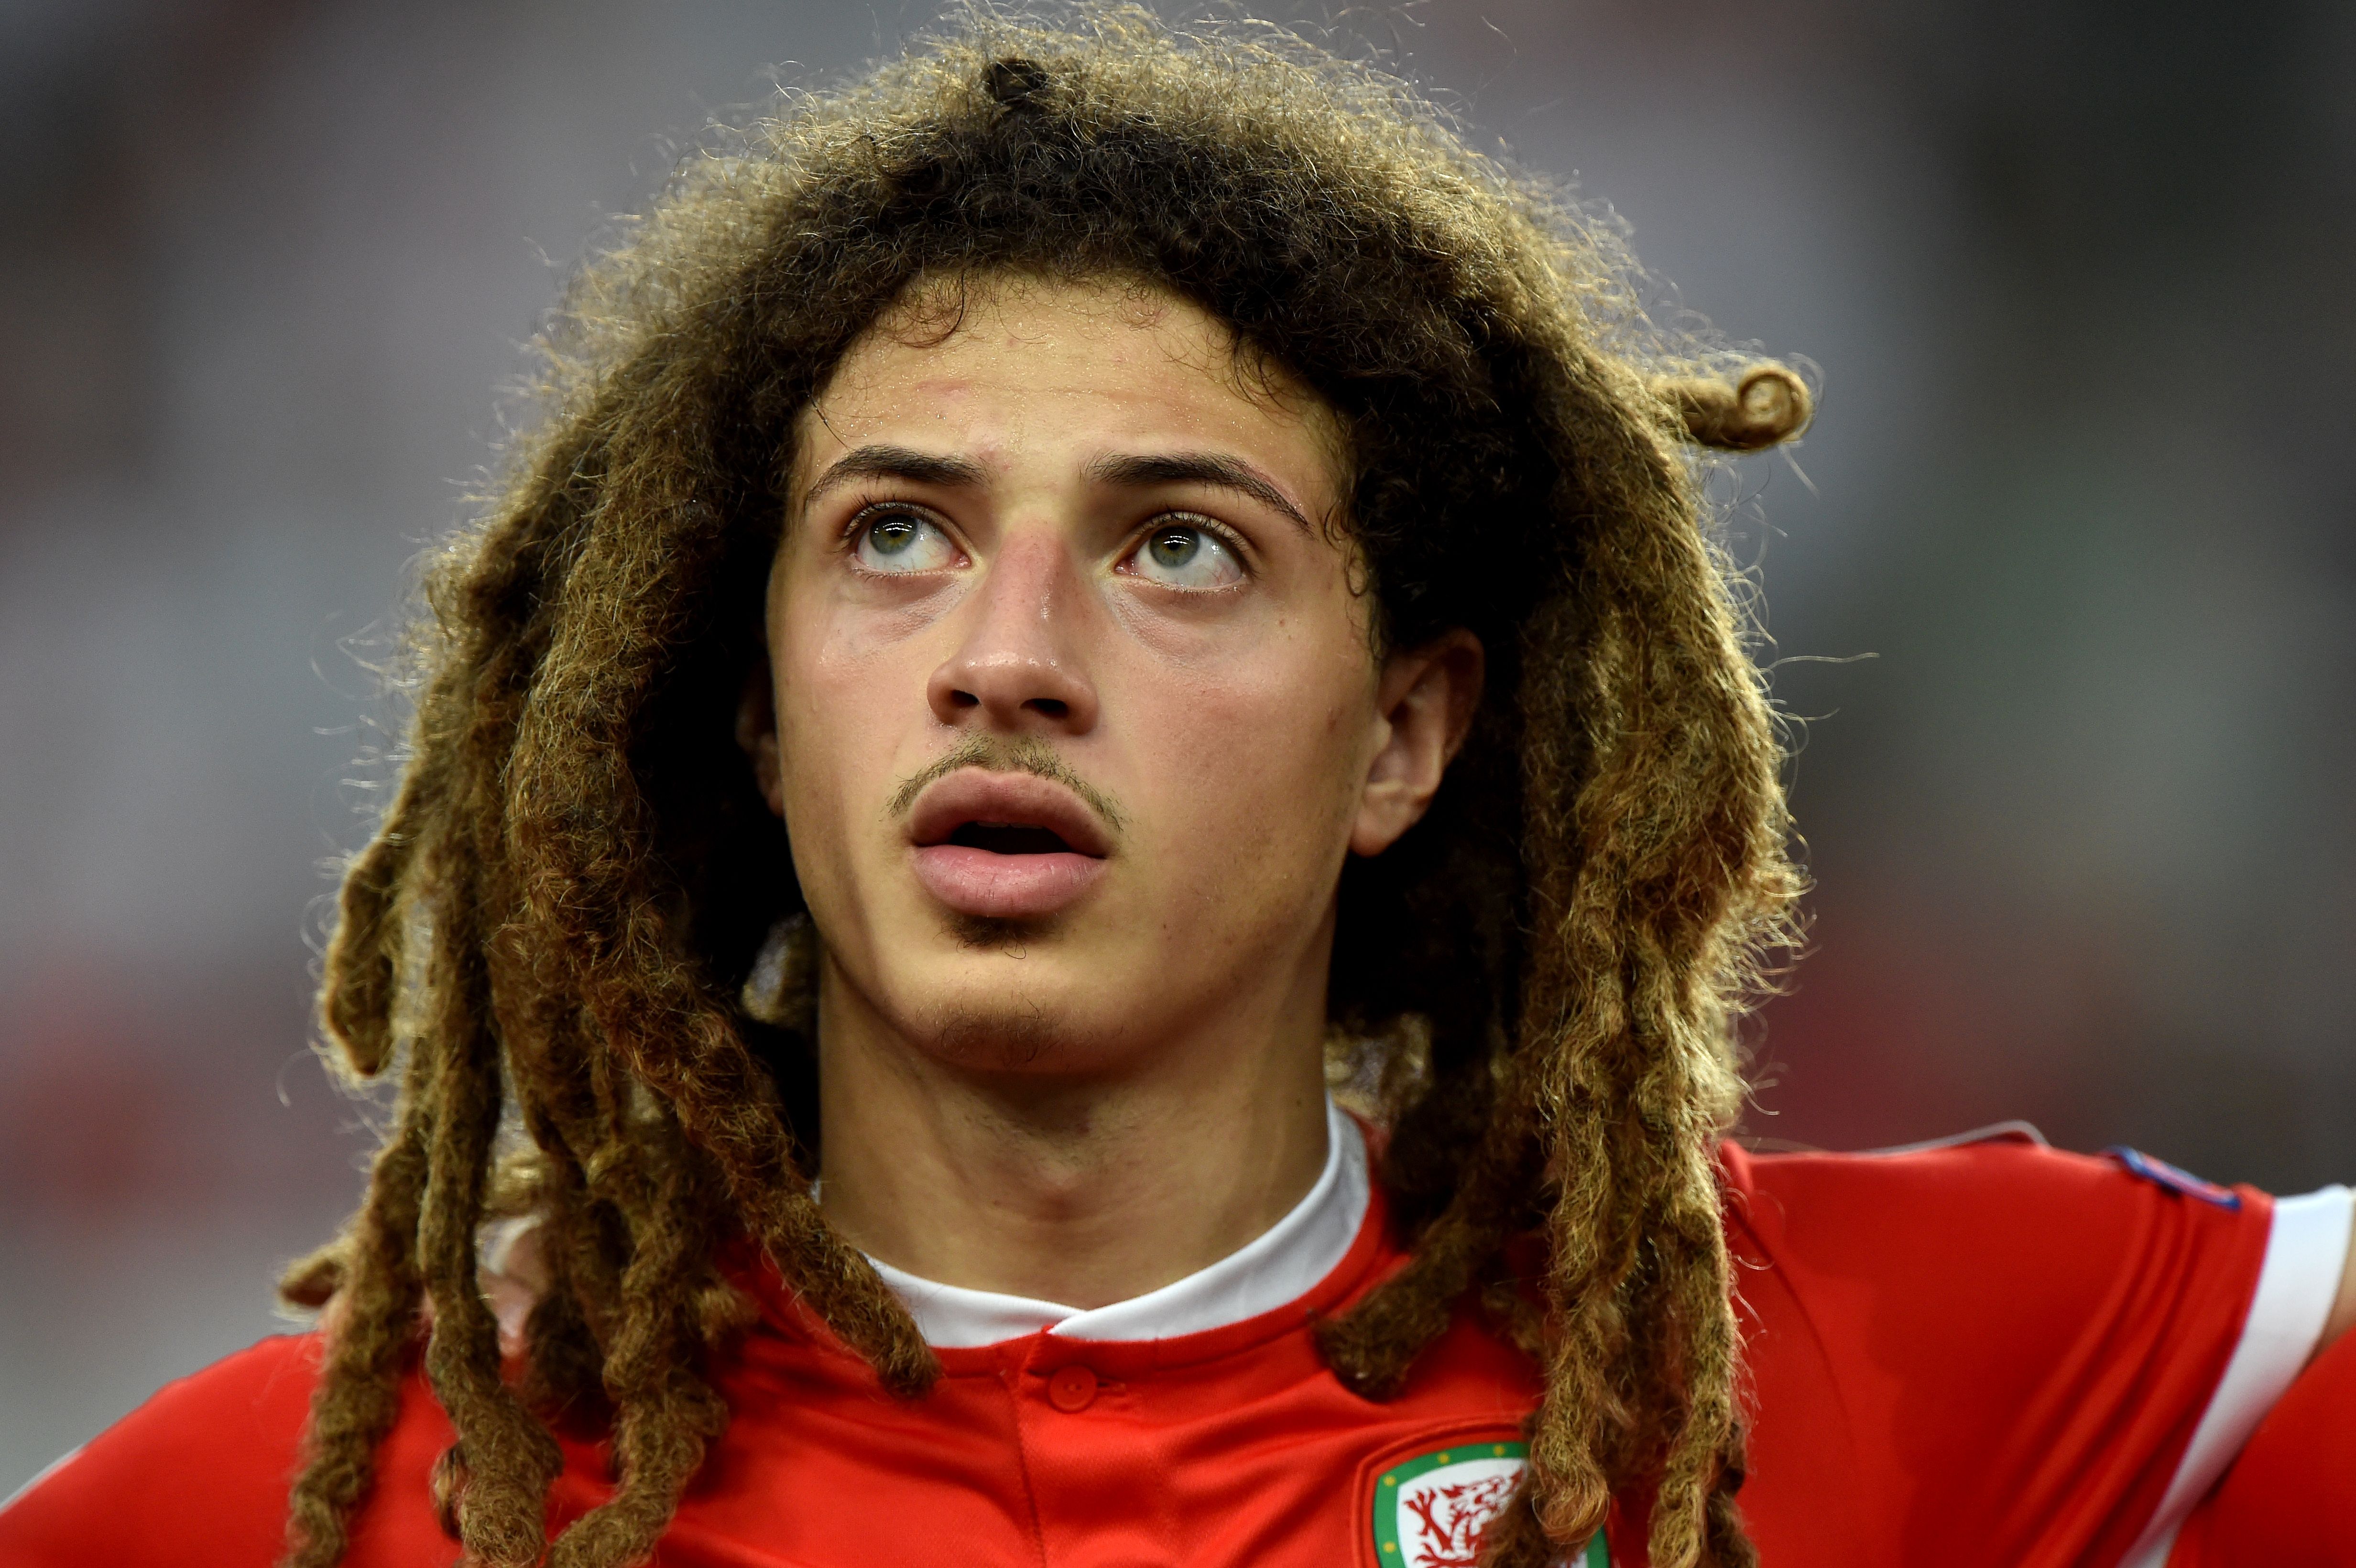 Ethan Ampadu will not take the field against Denmark due to a suspension. (Photo by Attila Kisbenedek/AFP/Getty Images)